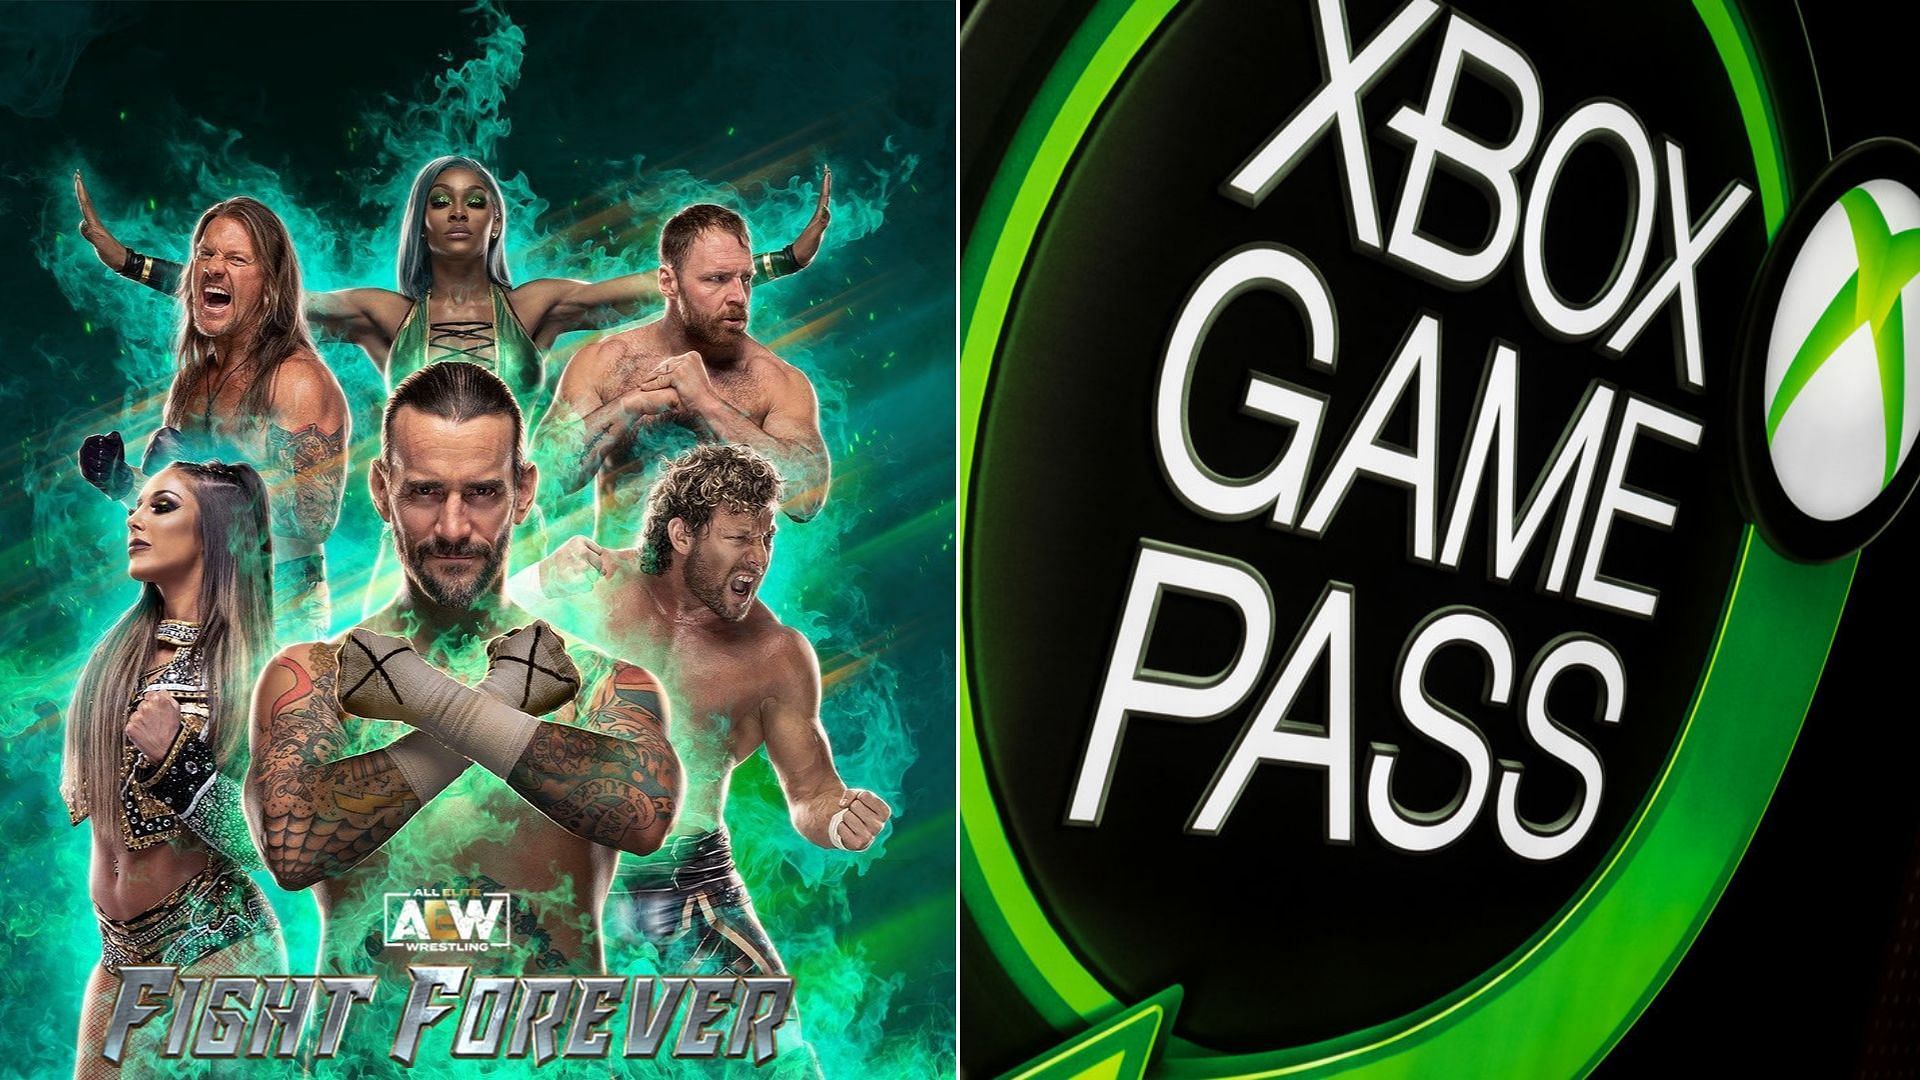 Will AEW Fight Forever be available on Xbox Game Pass?